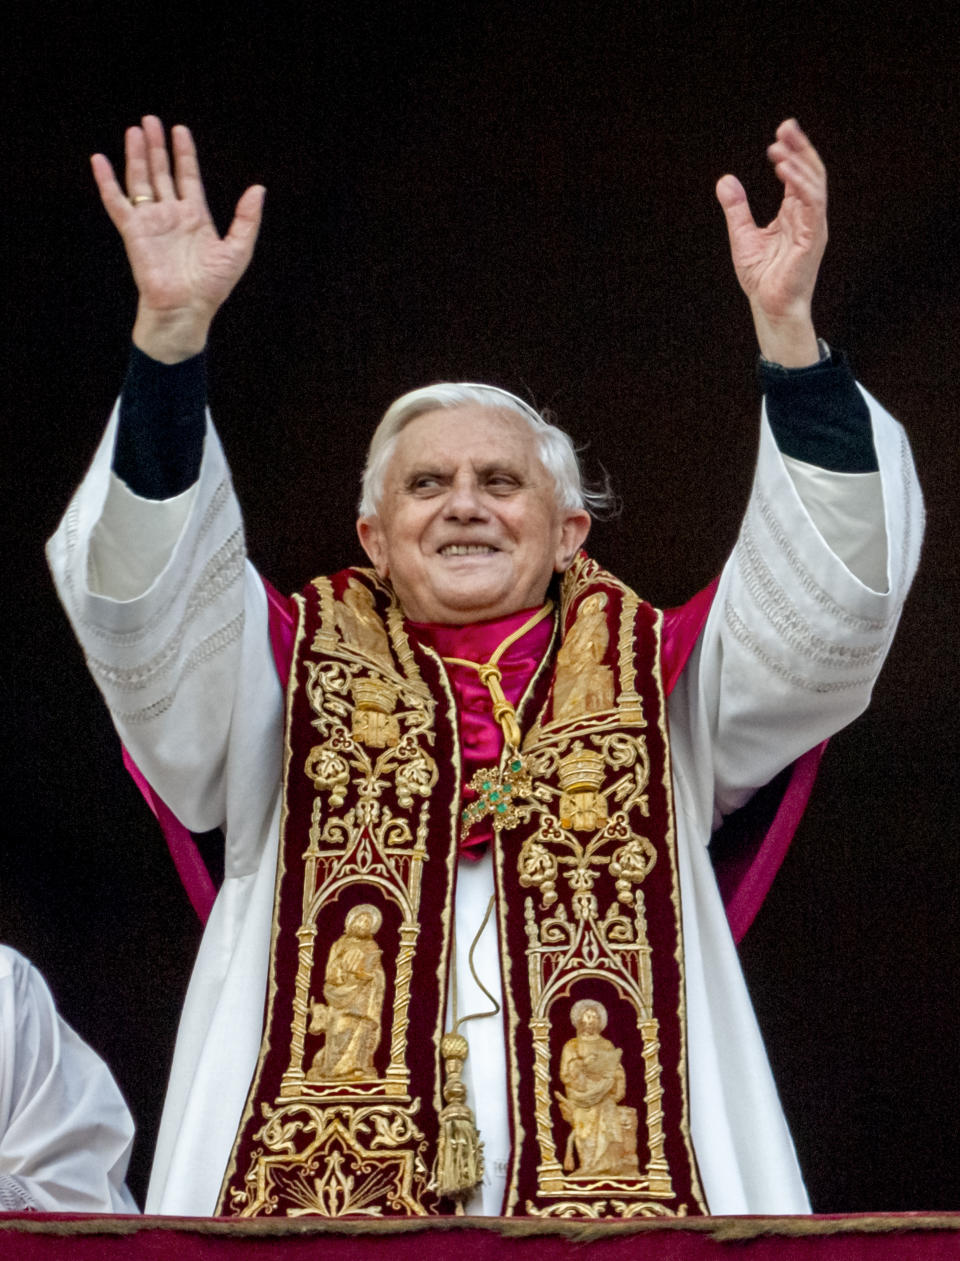 FILE - Pope Benedict XVI greets the crowd from the central balcony of St. Peter's Basilica at the Vatican soon after his election on April 19, 2005. Pope Emeritus Benedict XVI, the German theologian who will be remembered as the first pope in 600 years to resign, has died, the Vatican announced Saturday. He was 95. (AP Photo/Domenico Stinellis, File)